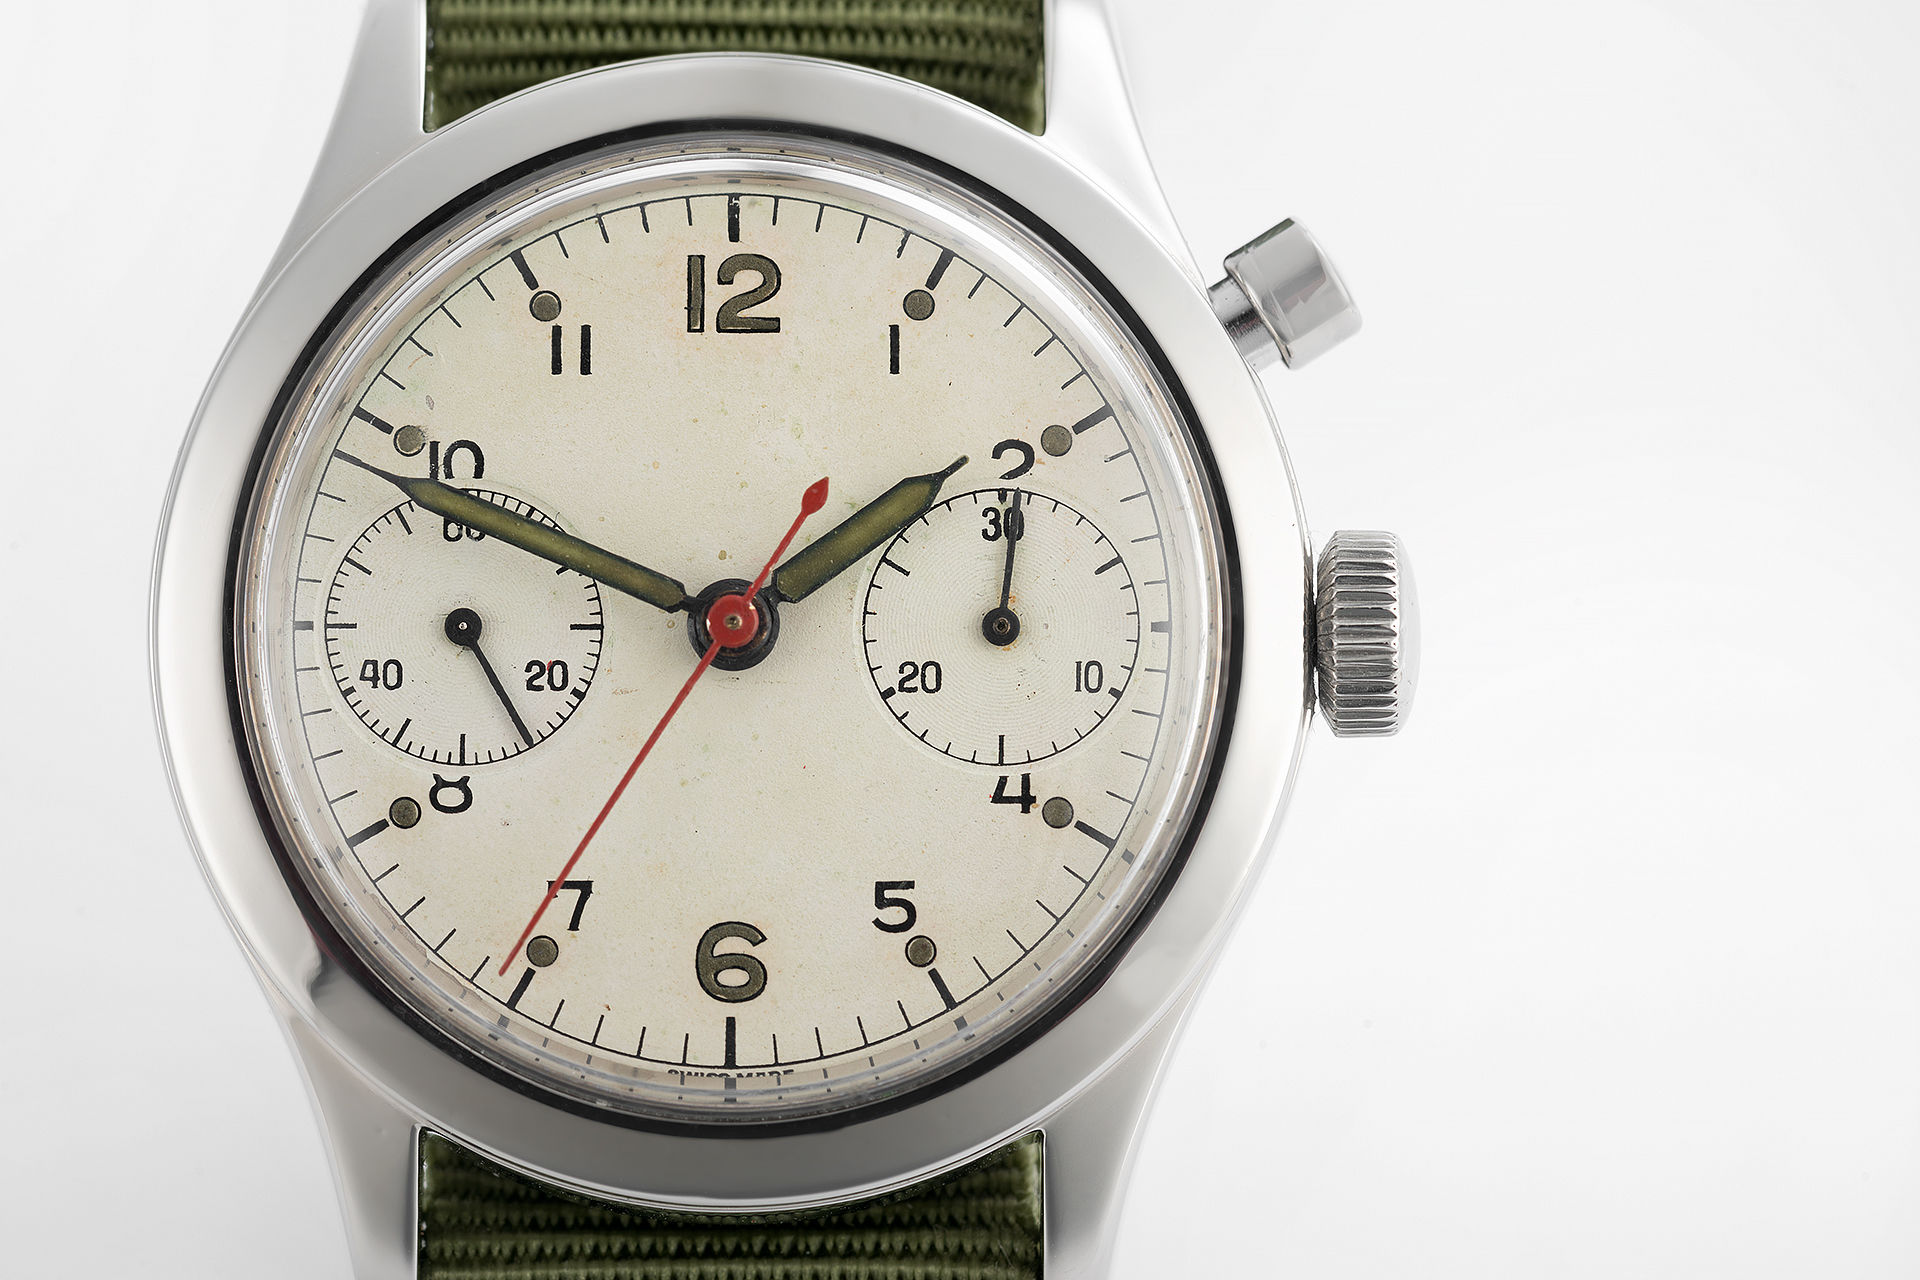 ref 6W/16 | 'Royal Canadian Air Force' | Omega Military